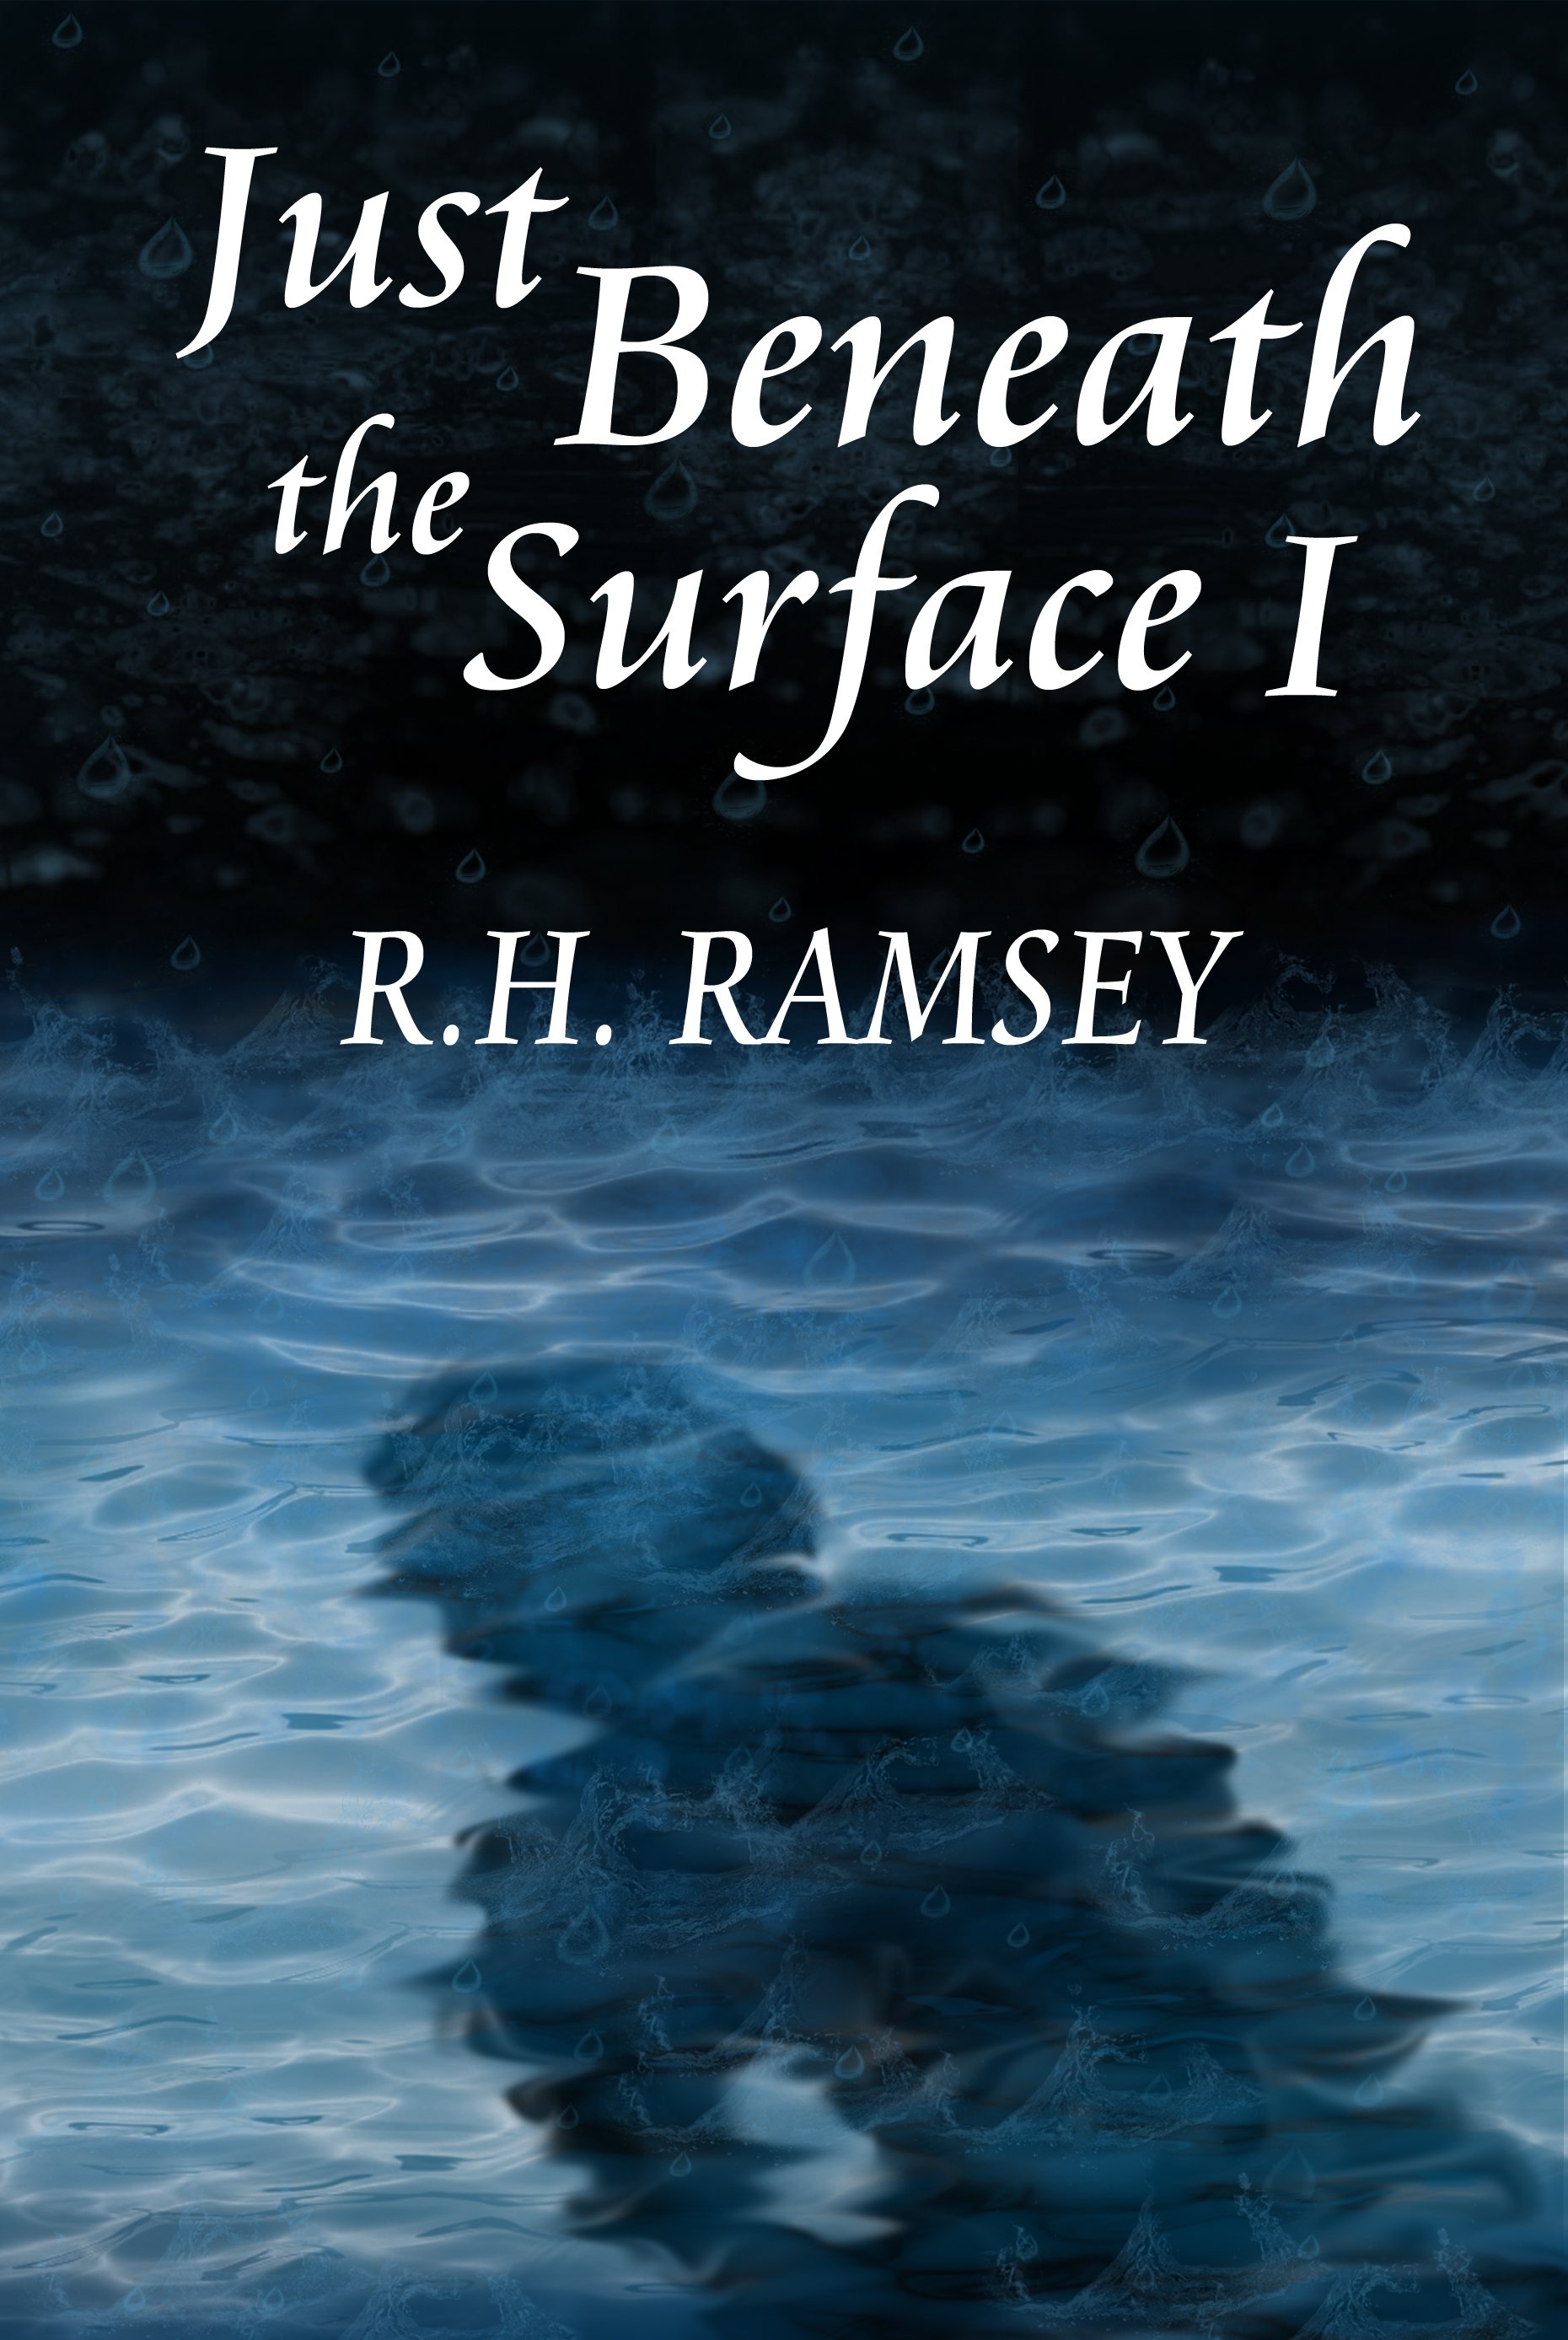 Book Review: Just Beneath The Surface By R.H. Ramsey